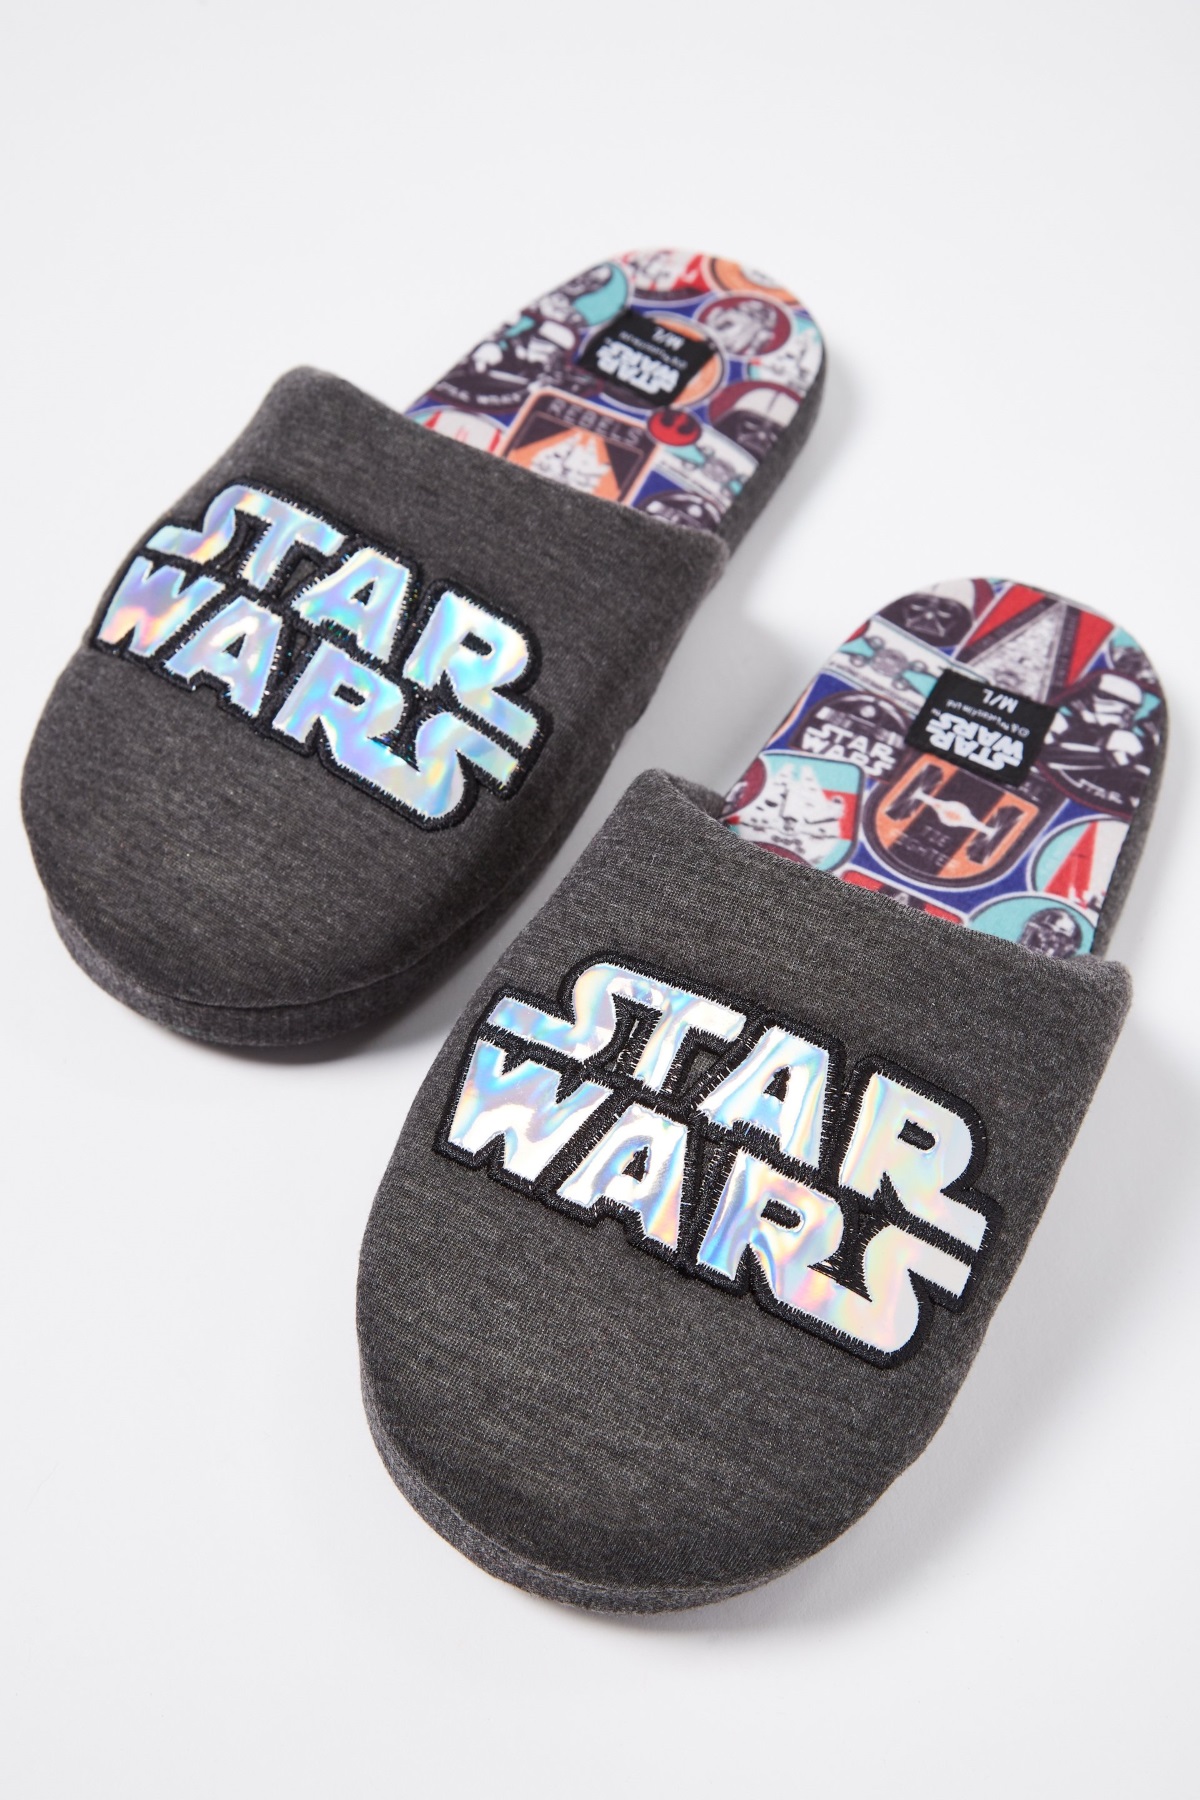 Star Wars Slippers at Cotton On NZ